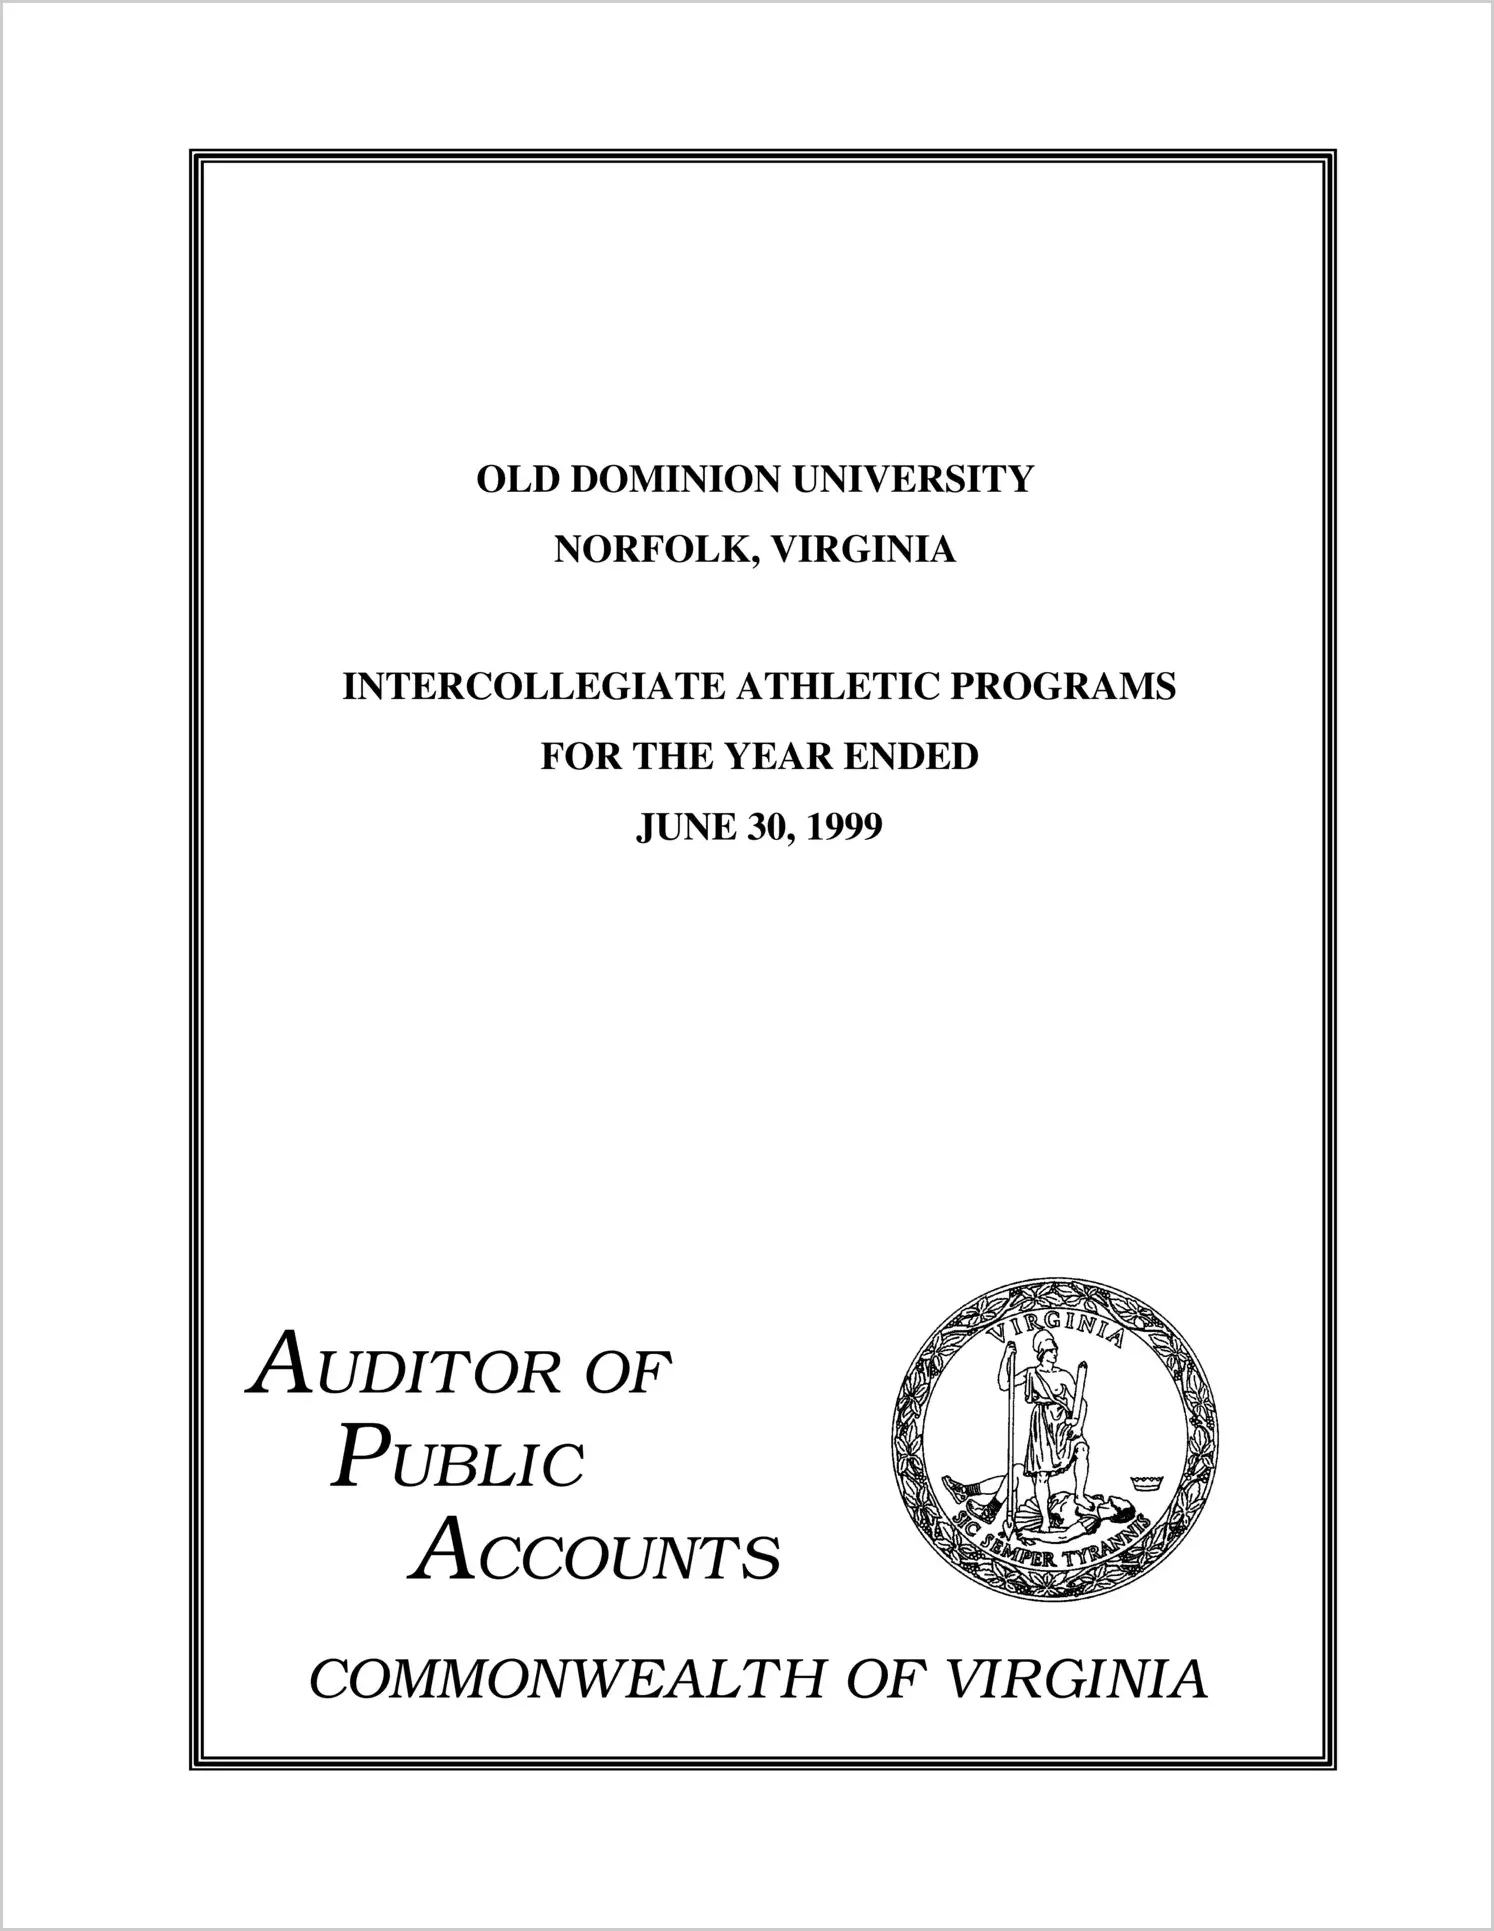 Old Dominion University Intercollegiate Athletic Programs for the year ended June 30, 1999